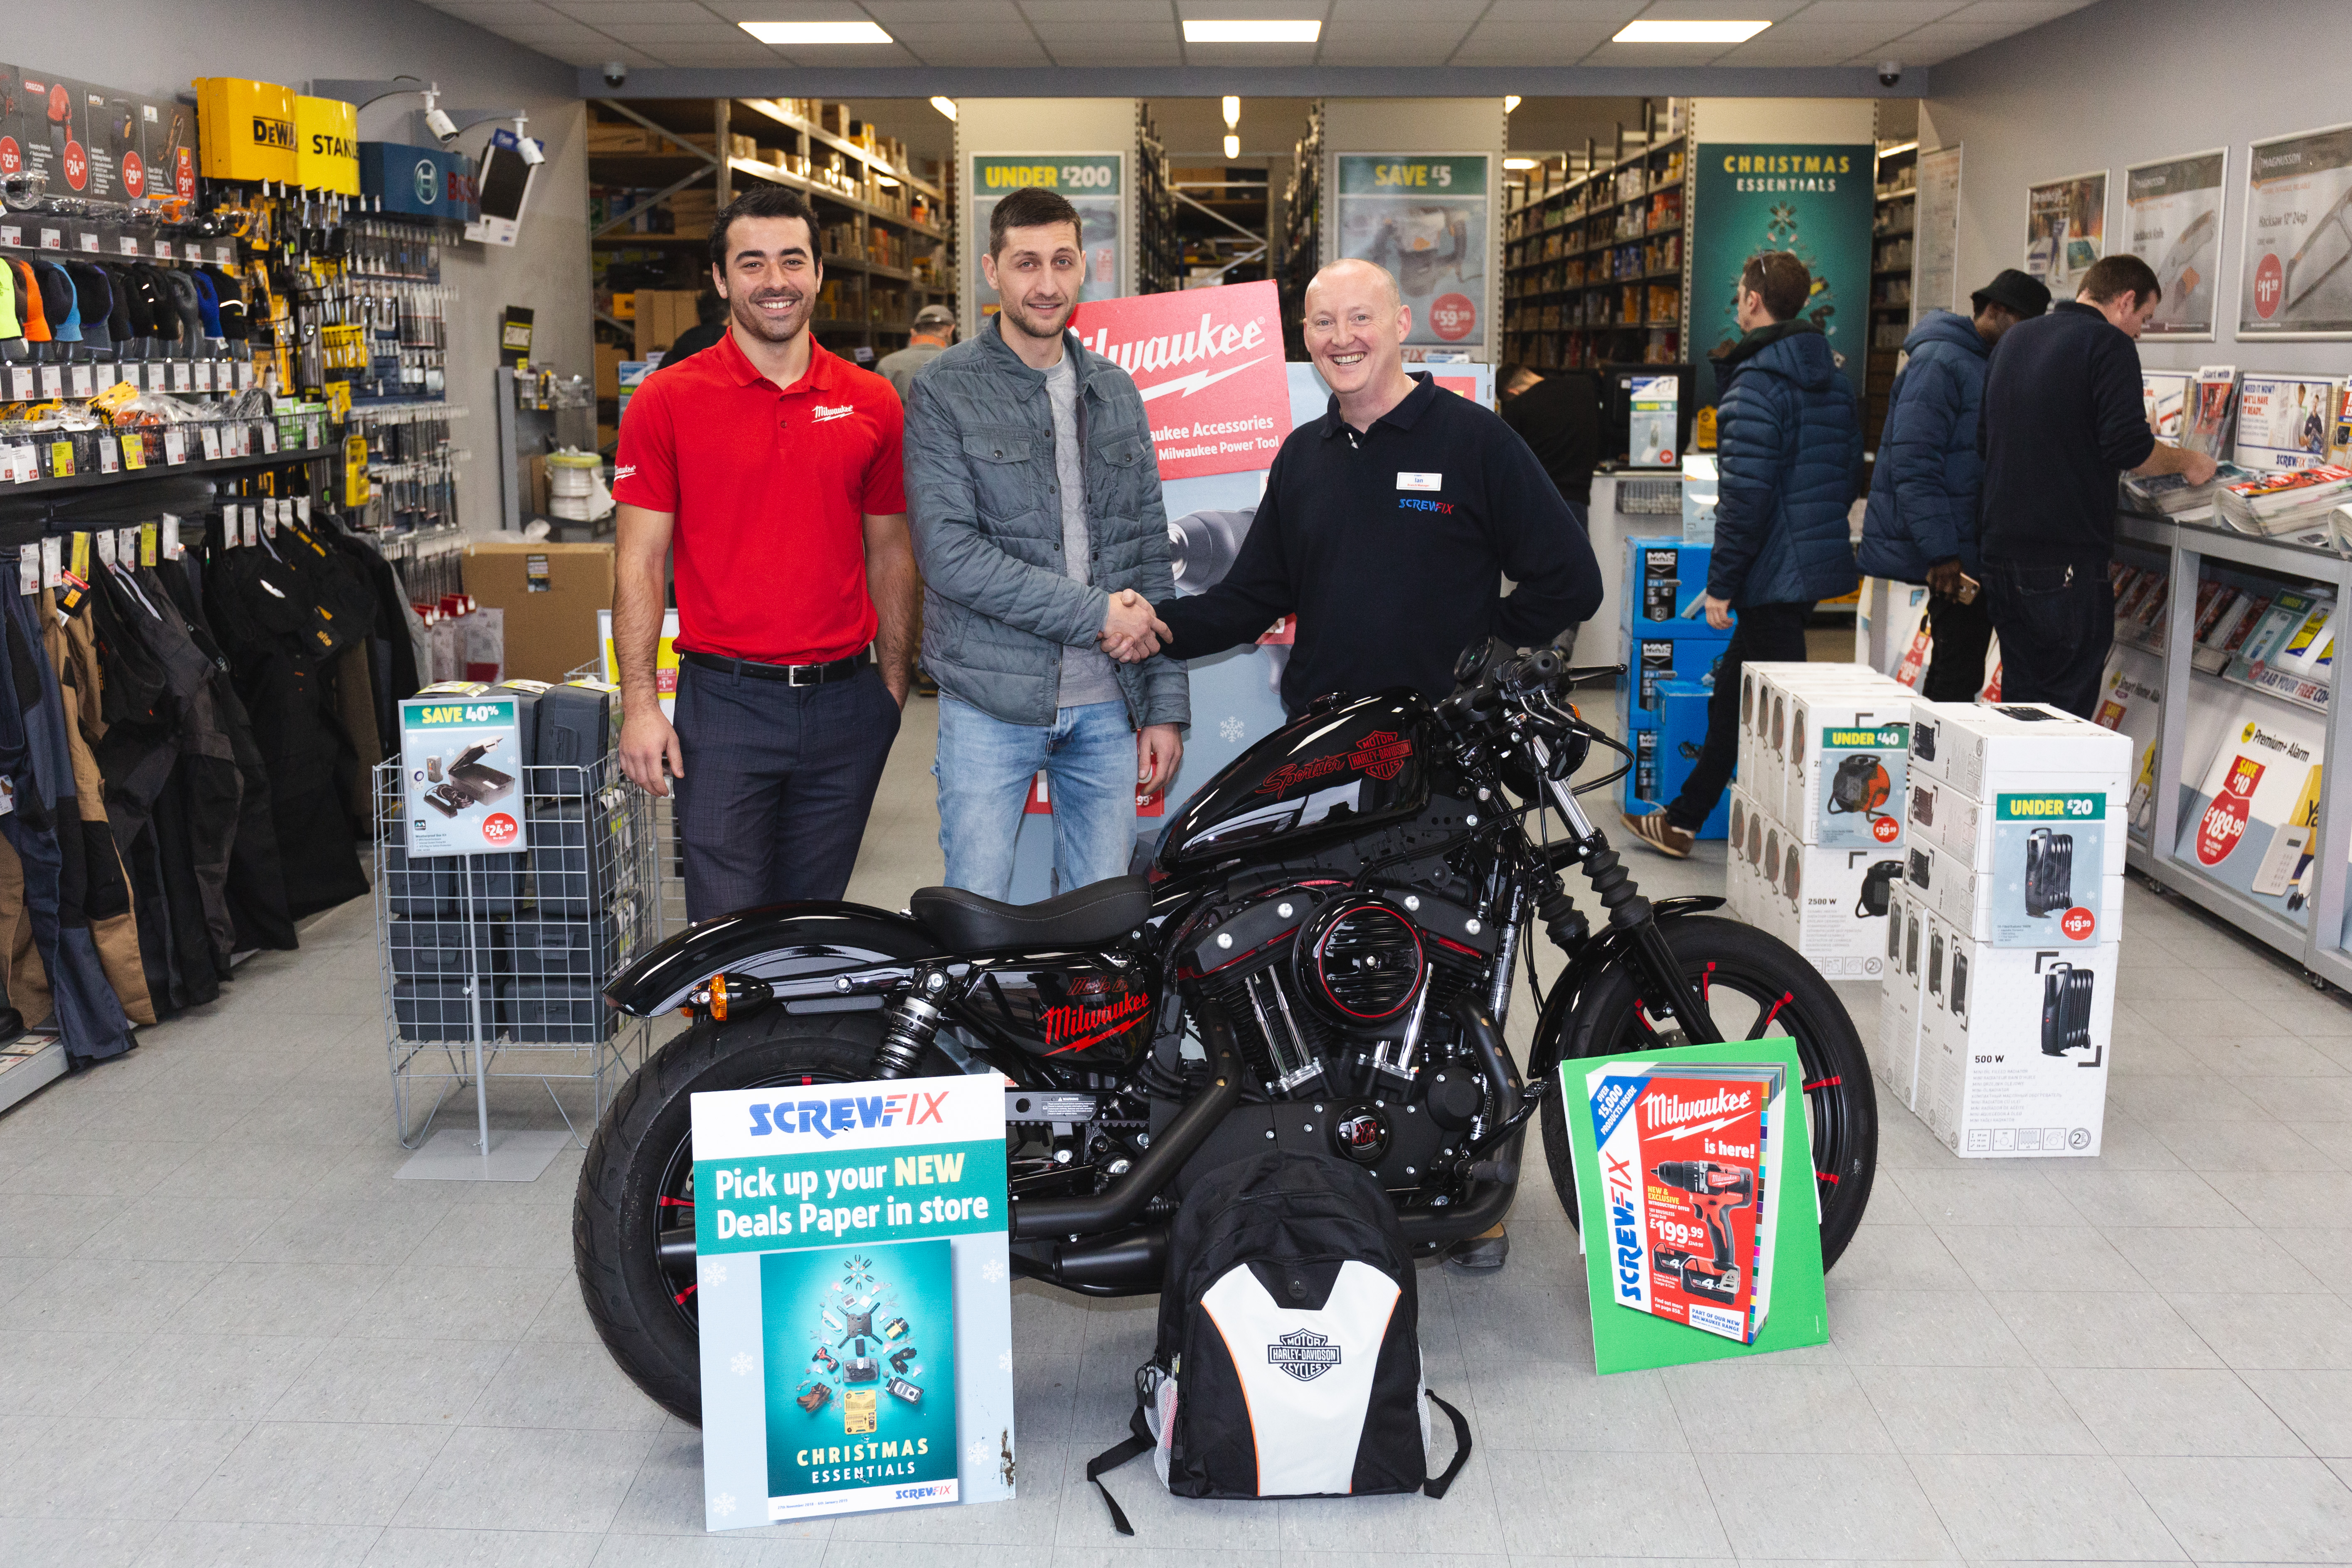 Winner of Screwfix’s Milwaukee competition gets his Harley bike!